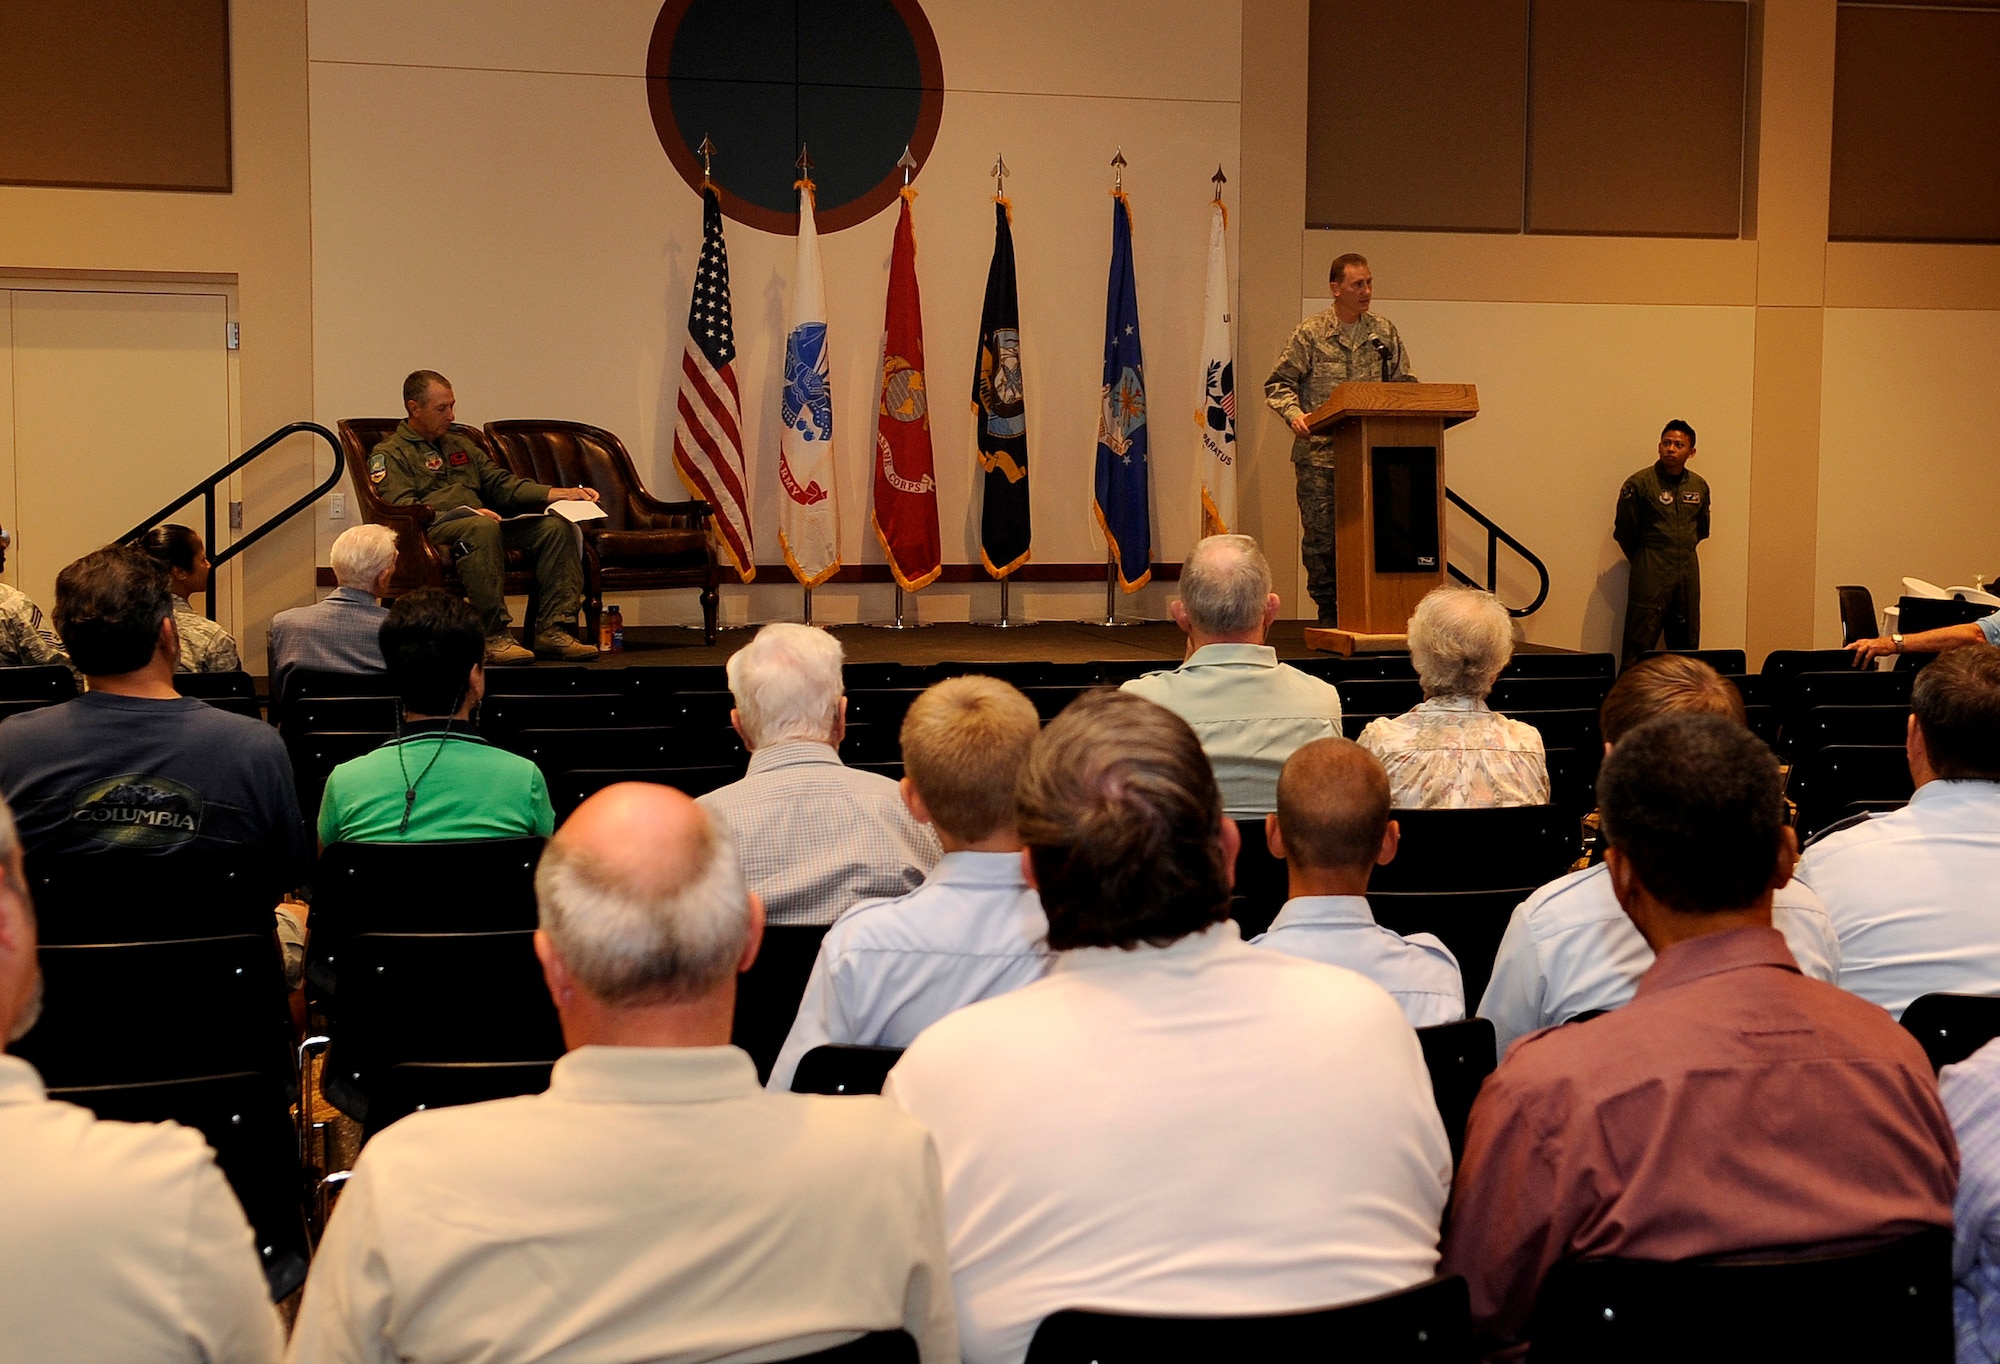 BUCKLEY AIR FORCE BASE, Colo. - Col. Clinton Crosier, 460th Space Wing commander, makes opening remarks at Buckley Air Force Base's 11th Annual Retiree Appreciation Day. Retirees from all five branches of service were present at the event July 18 at the Leadership Development Center. (U.S. Air Force photo by Senior Airman Steve Czyz)